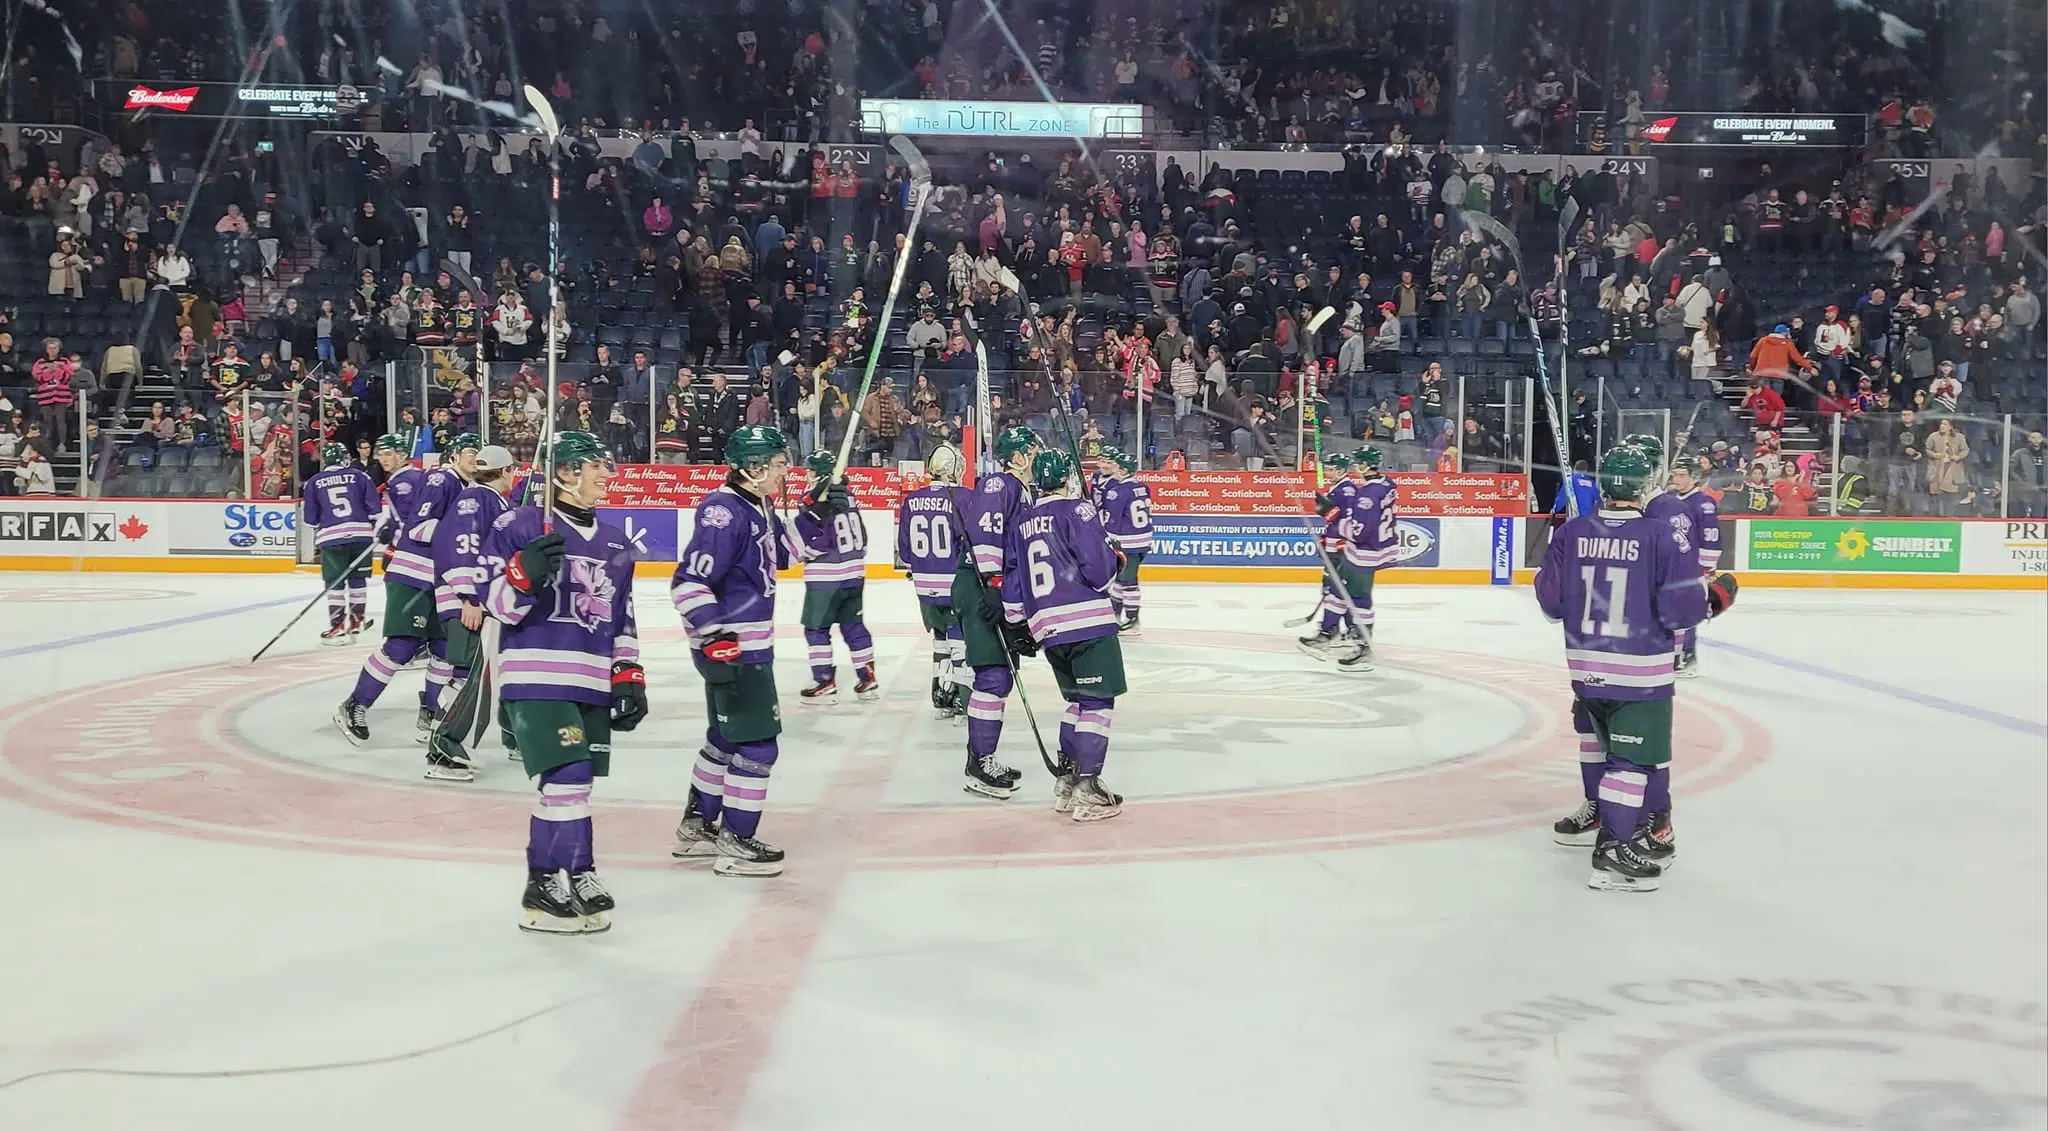 Mooseheads Fight Cancer Night Was Saturday